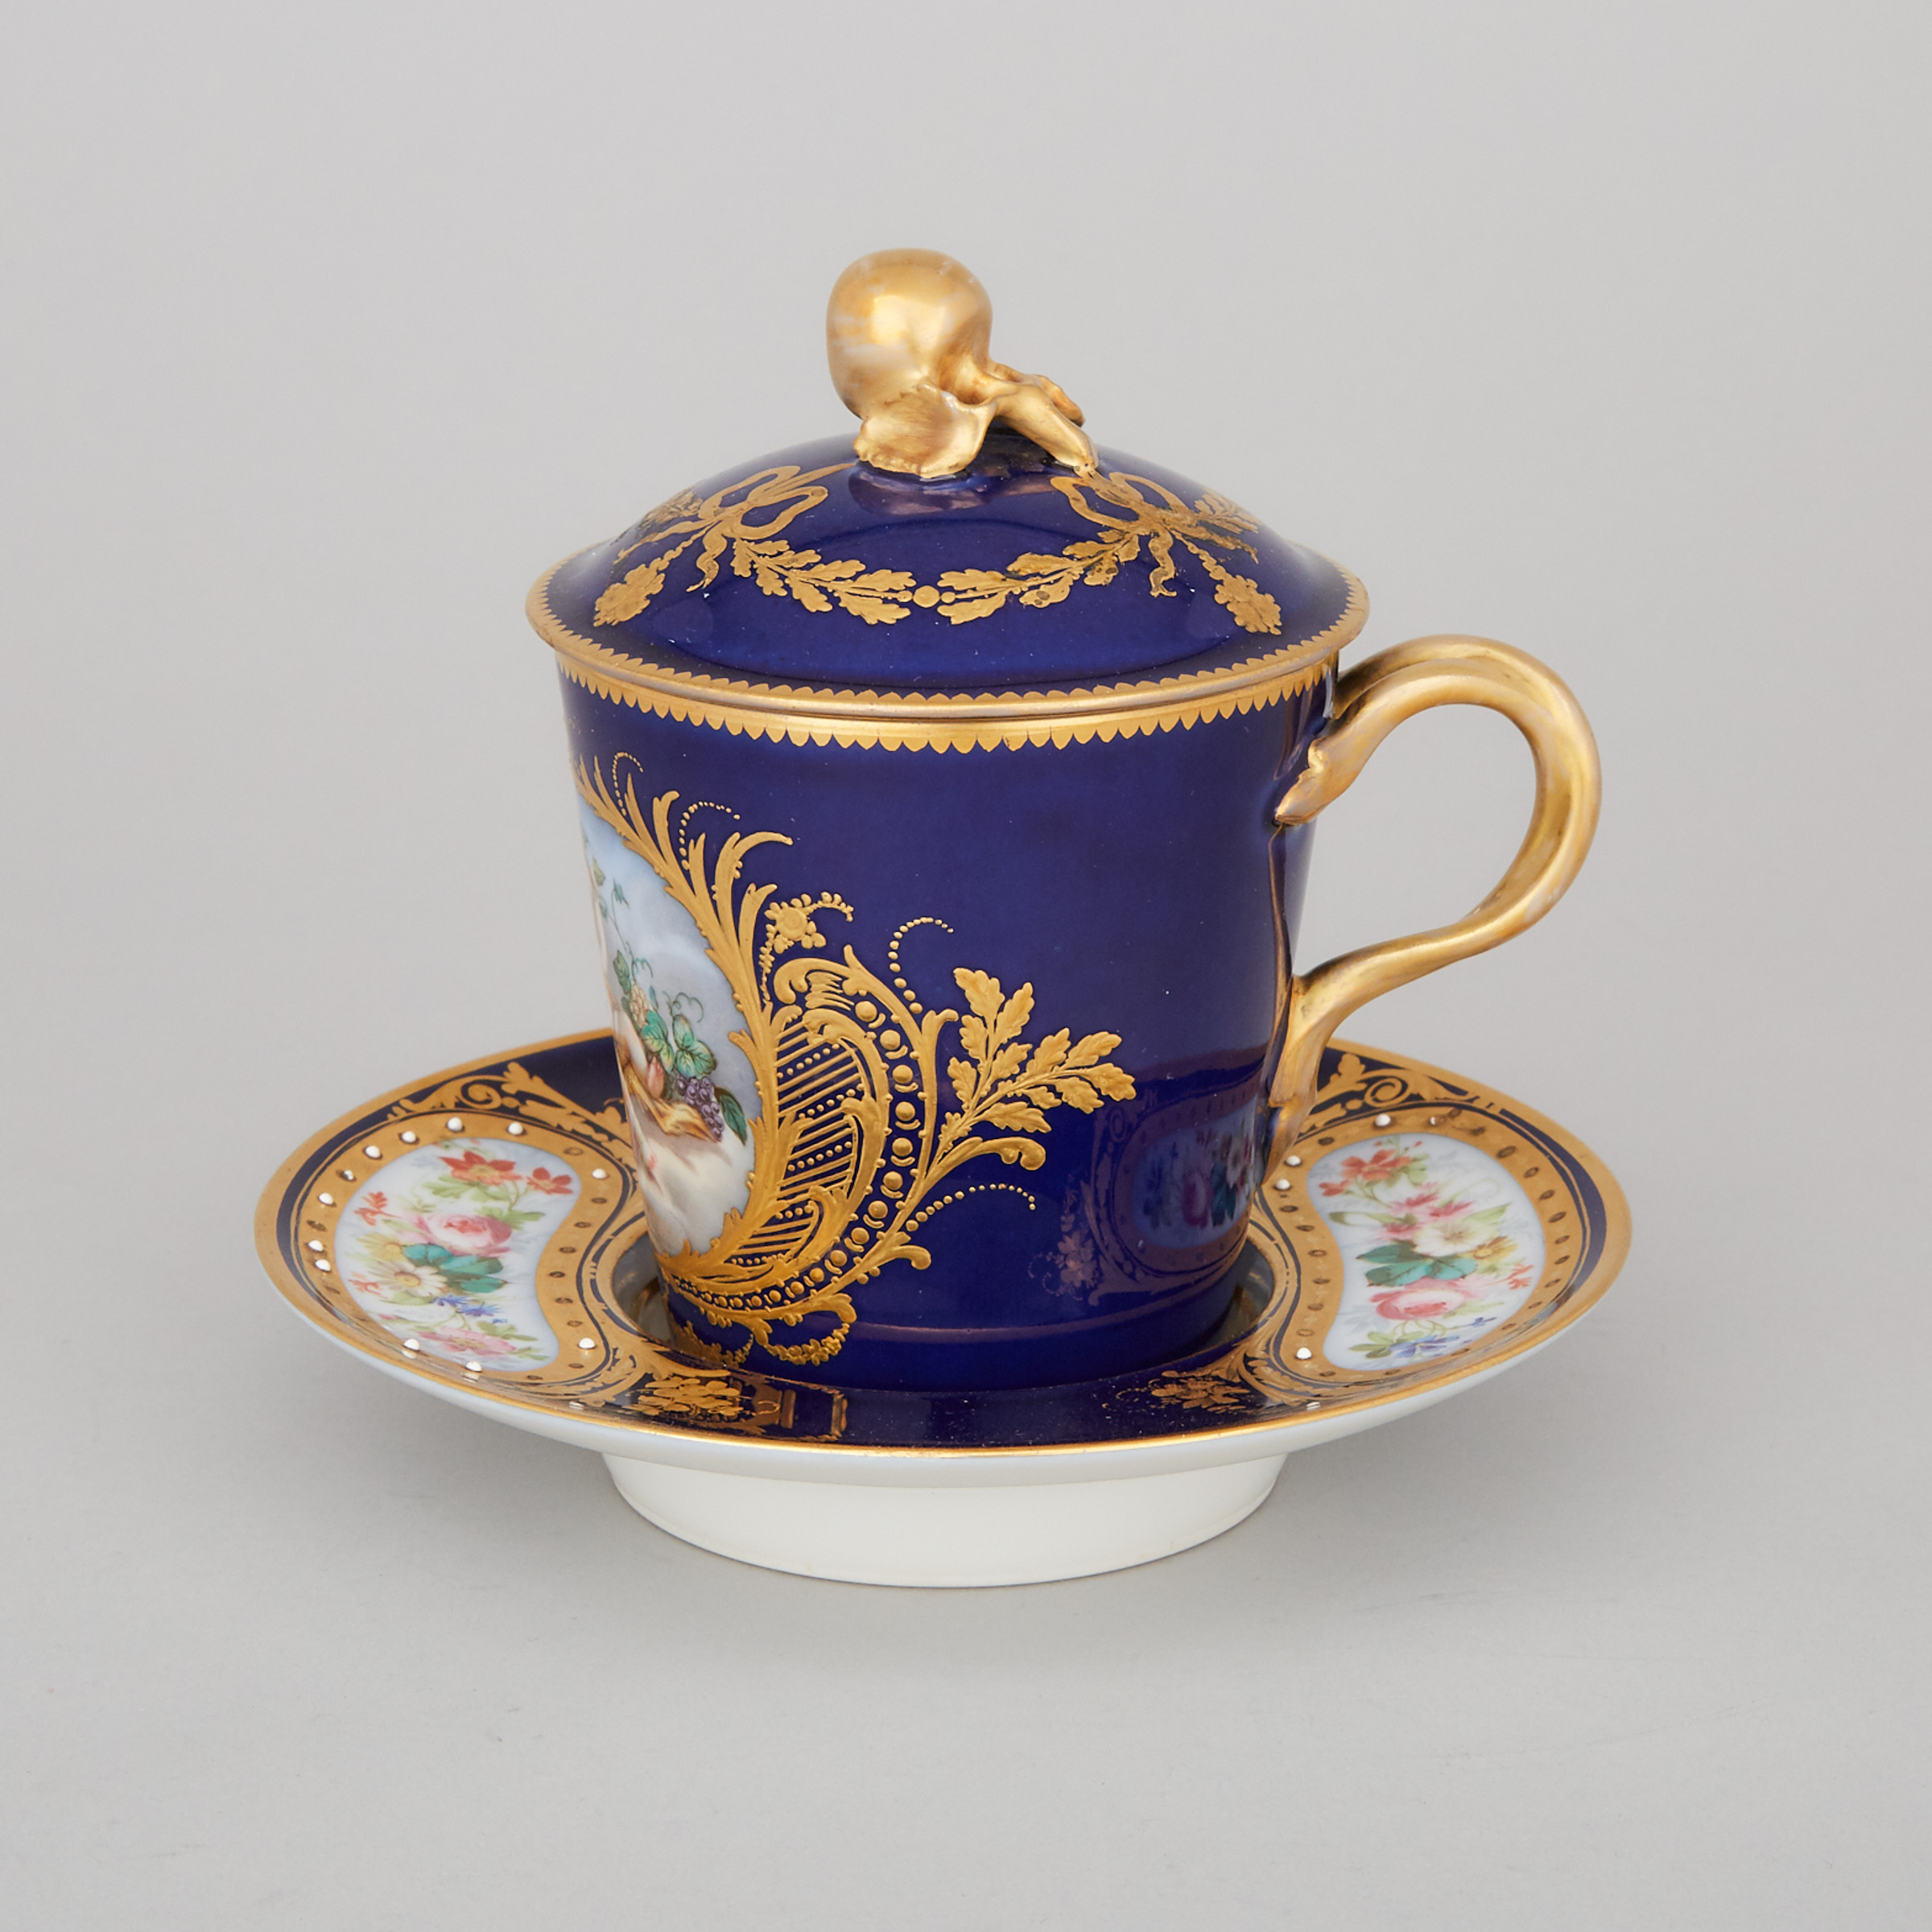 'Sèvres' 'Jeweled' Blue Ground Covered Cup and Saucer, early 20th century